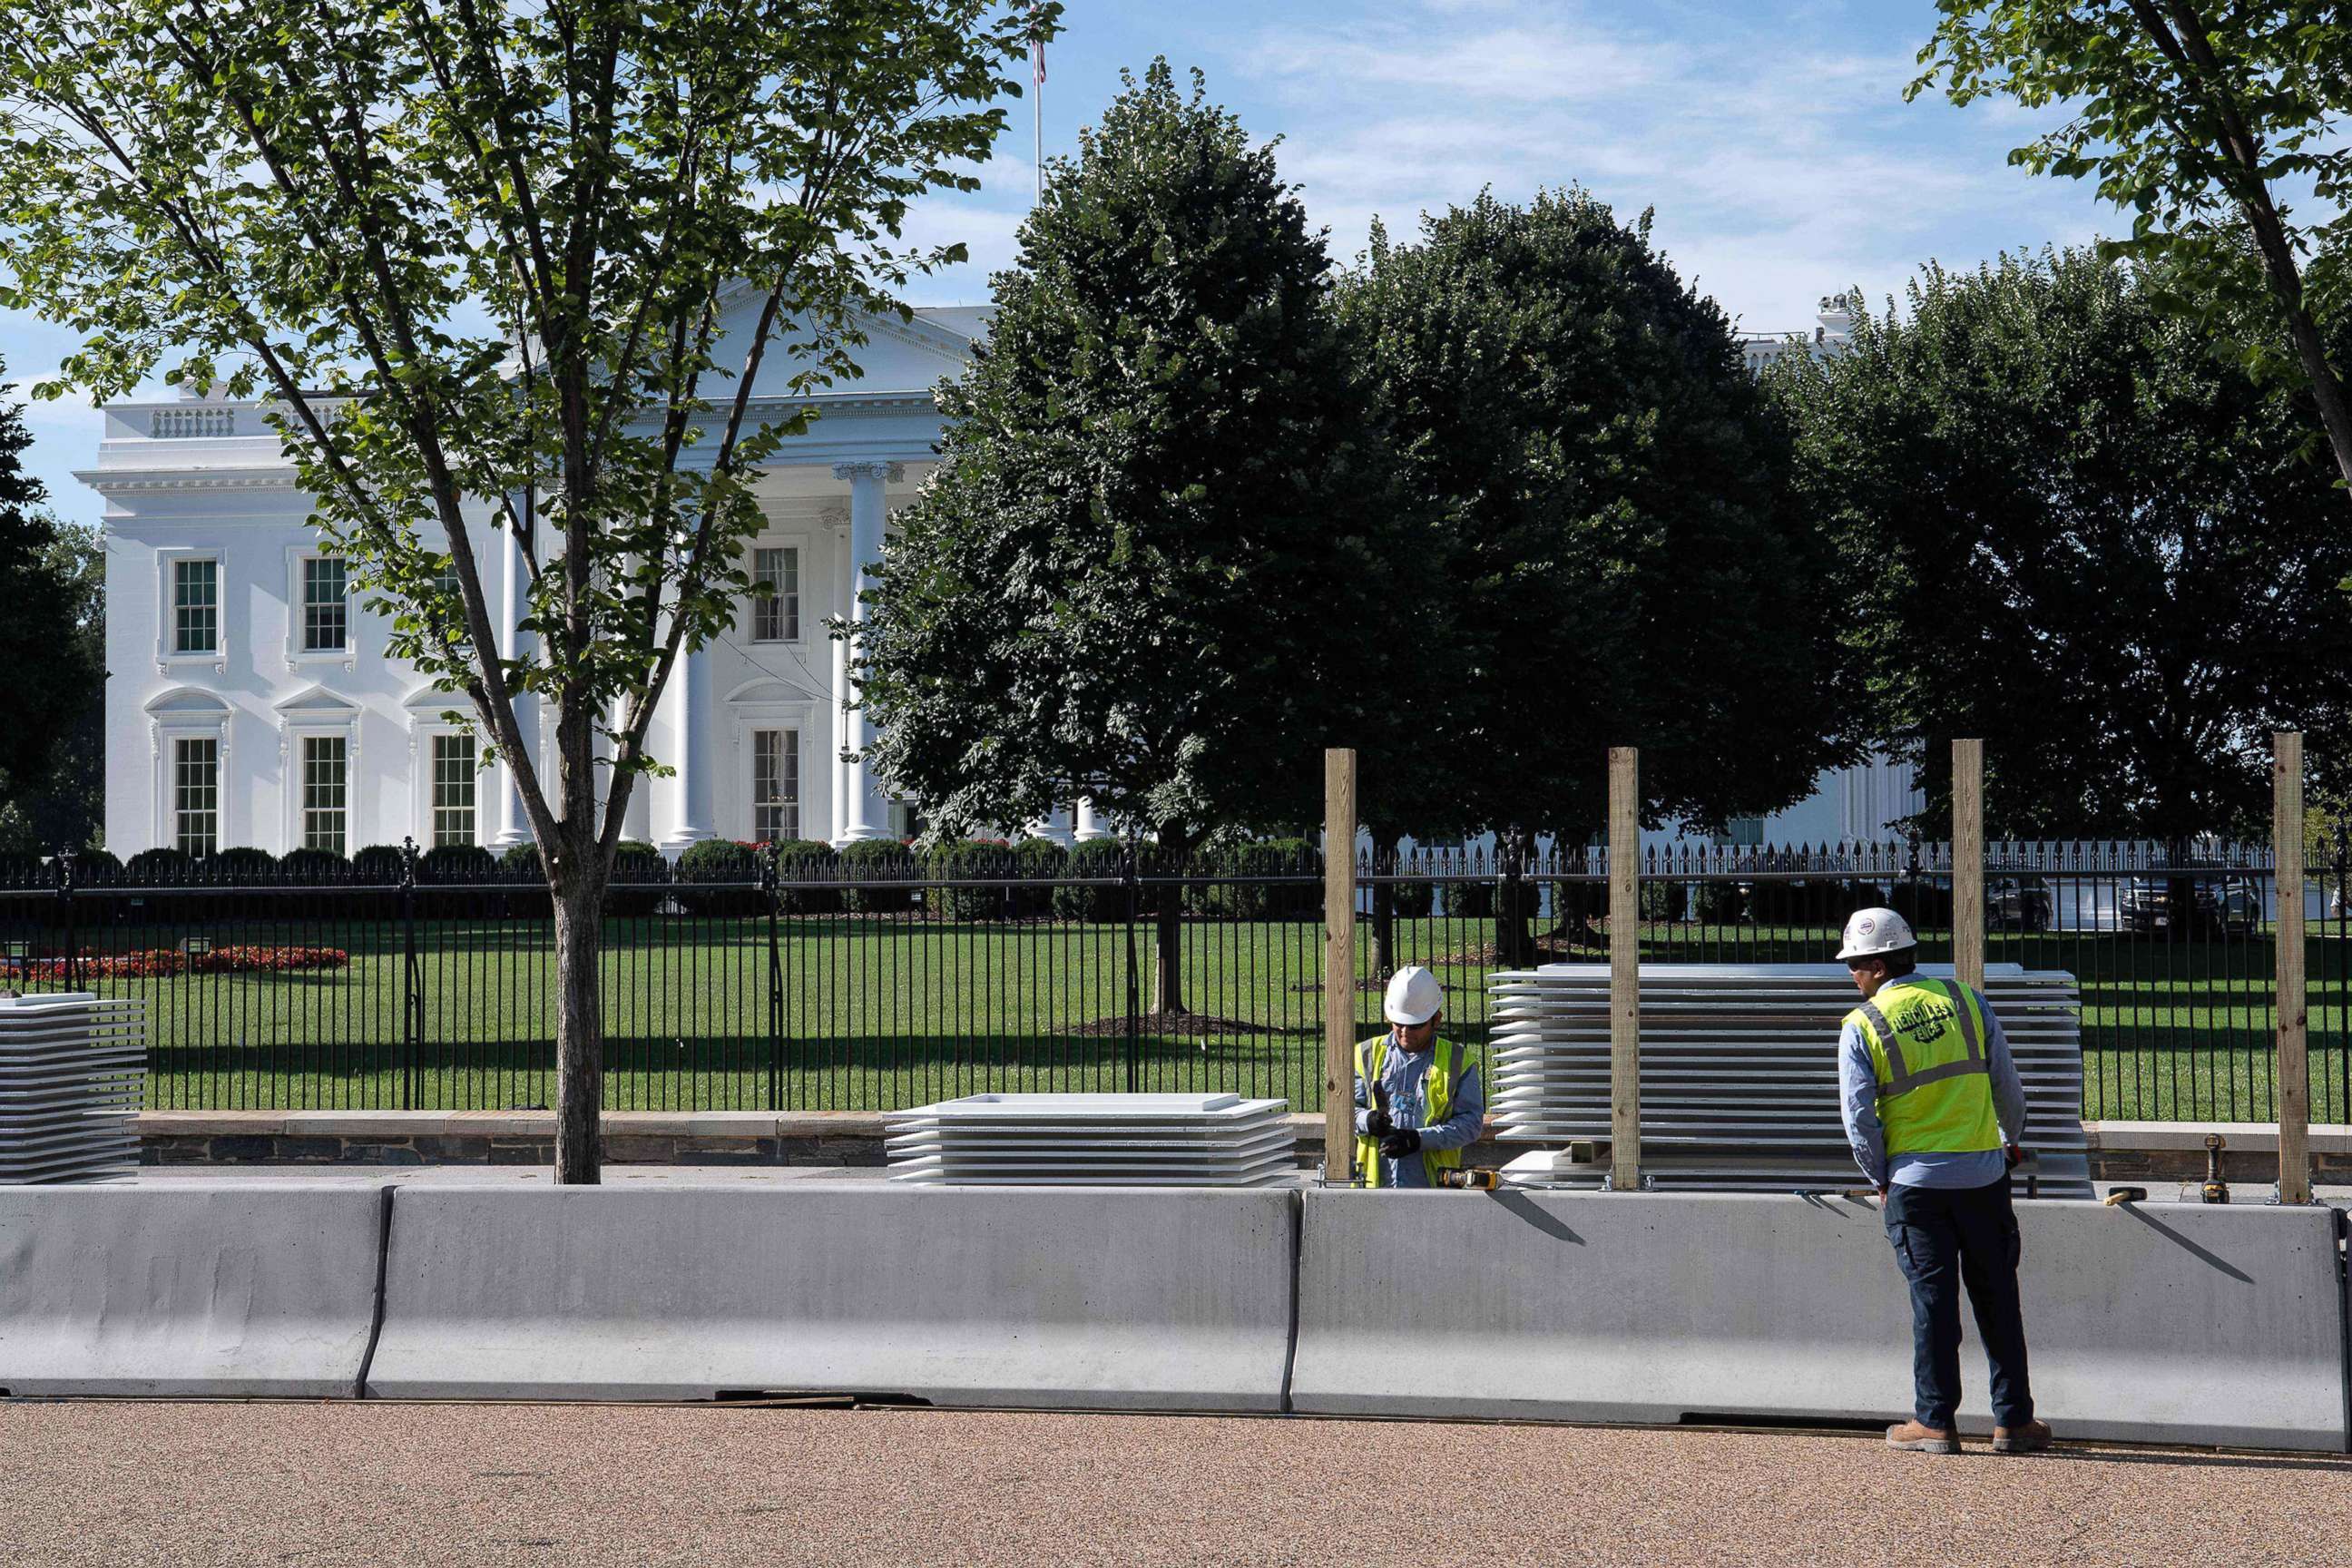 PHOTO: Workers construct a protective barrier ahead of a higher fence being erected in front of the White House in Washington, D.C., July 15, 2019.